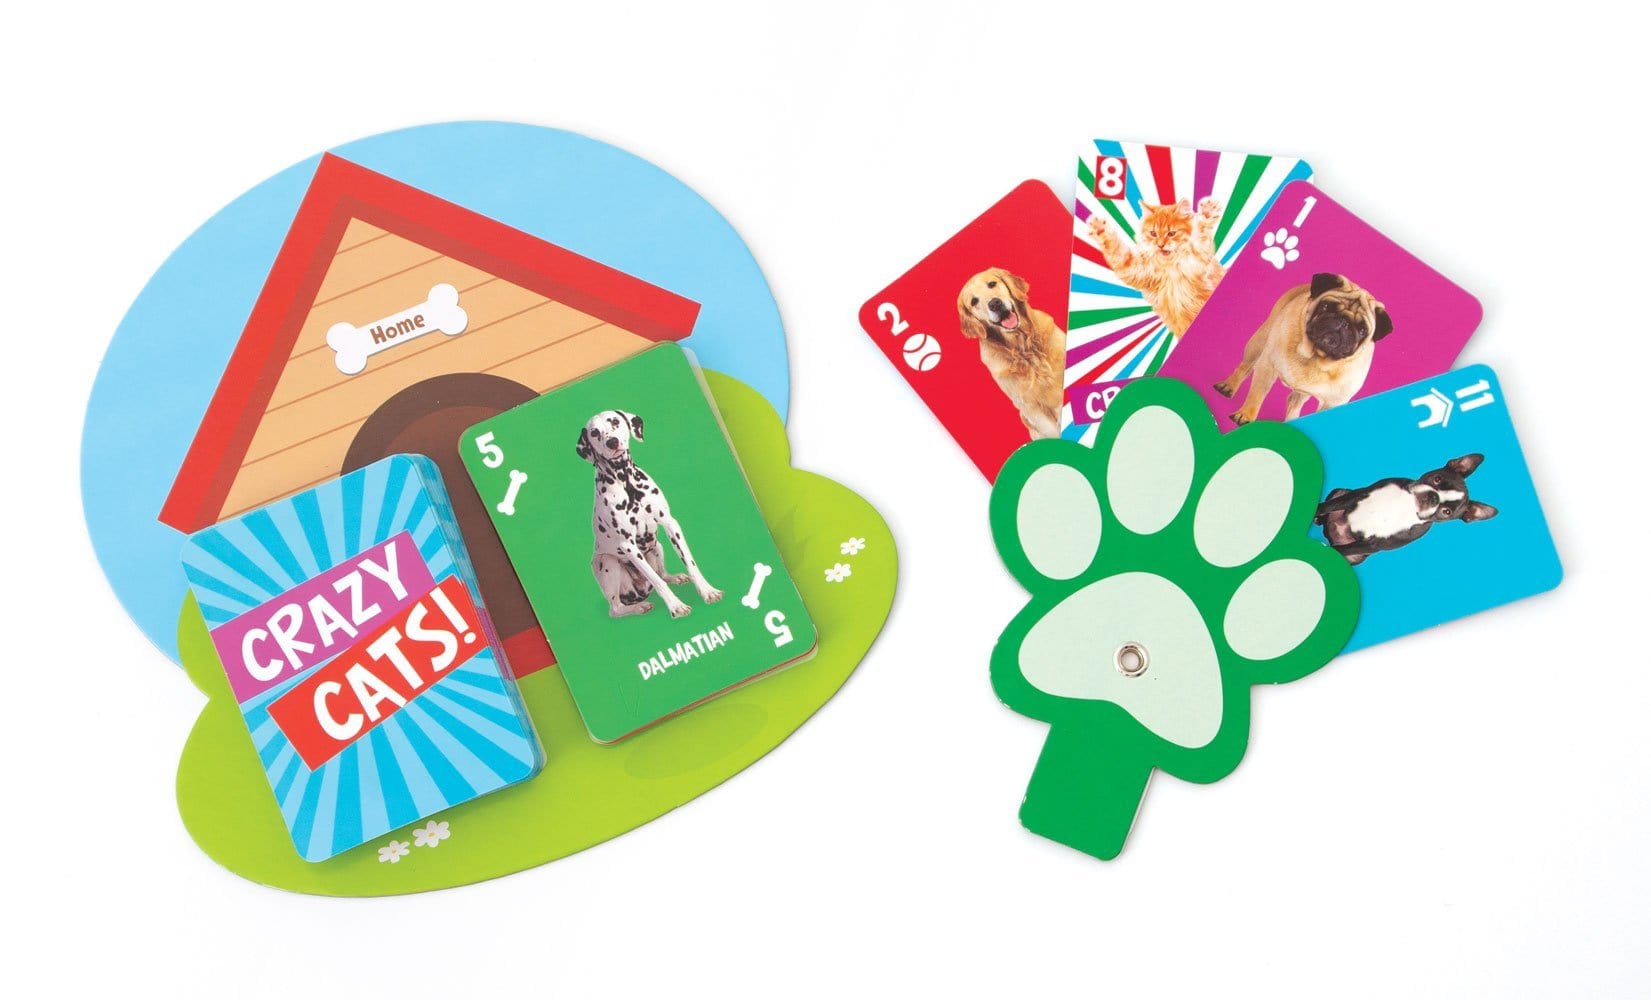 Crazy Eights Card Game - Crazy Pets - Paper House